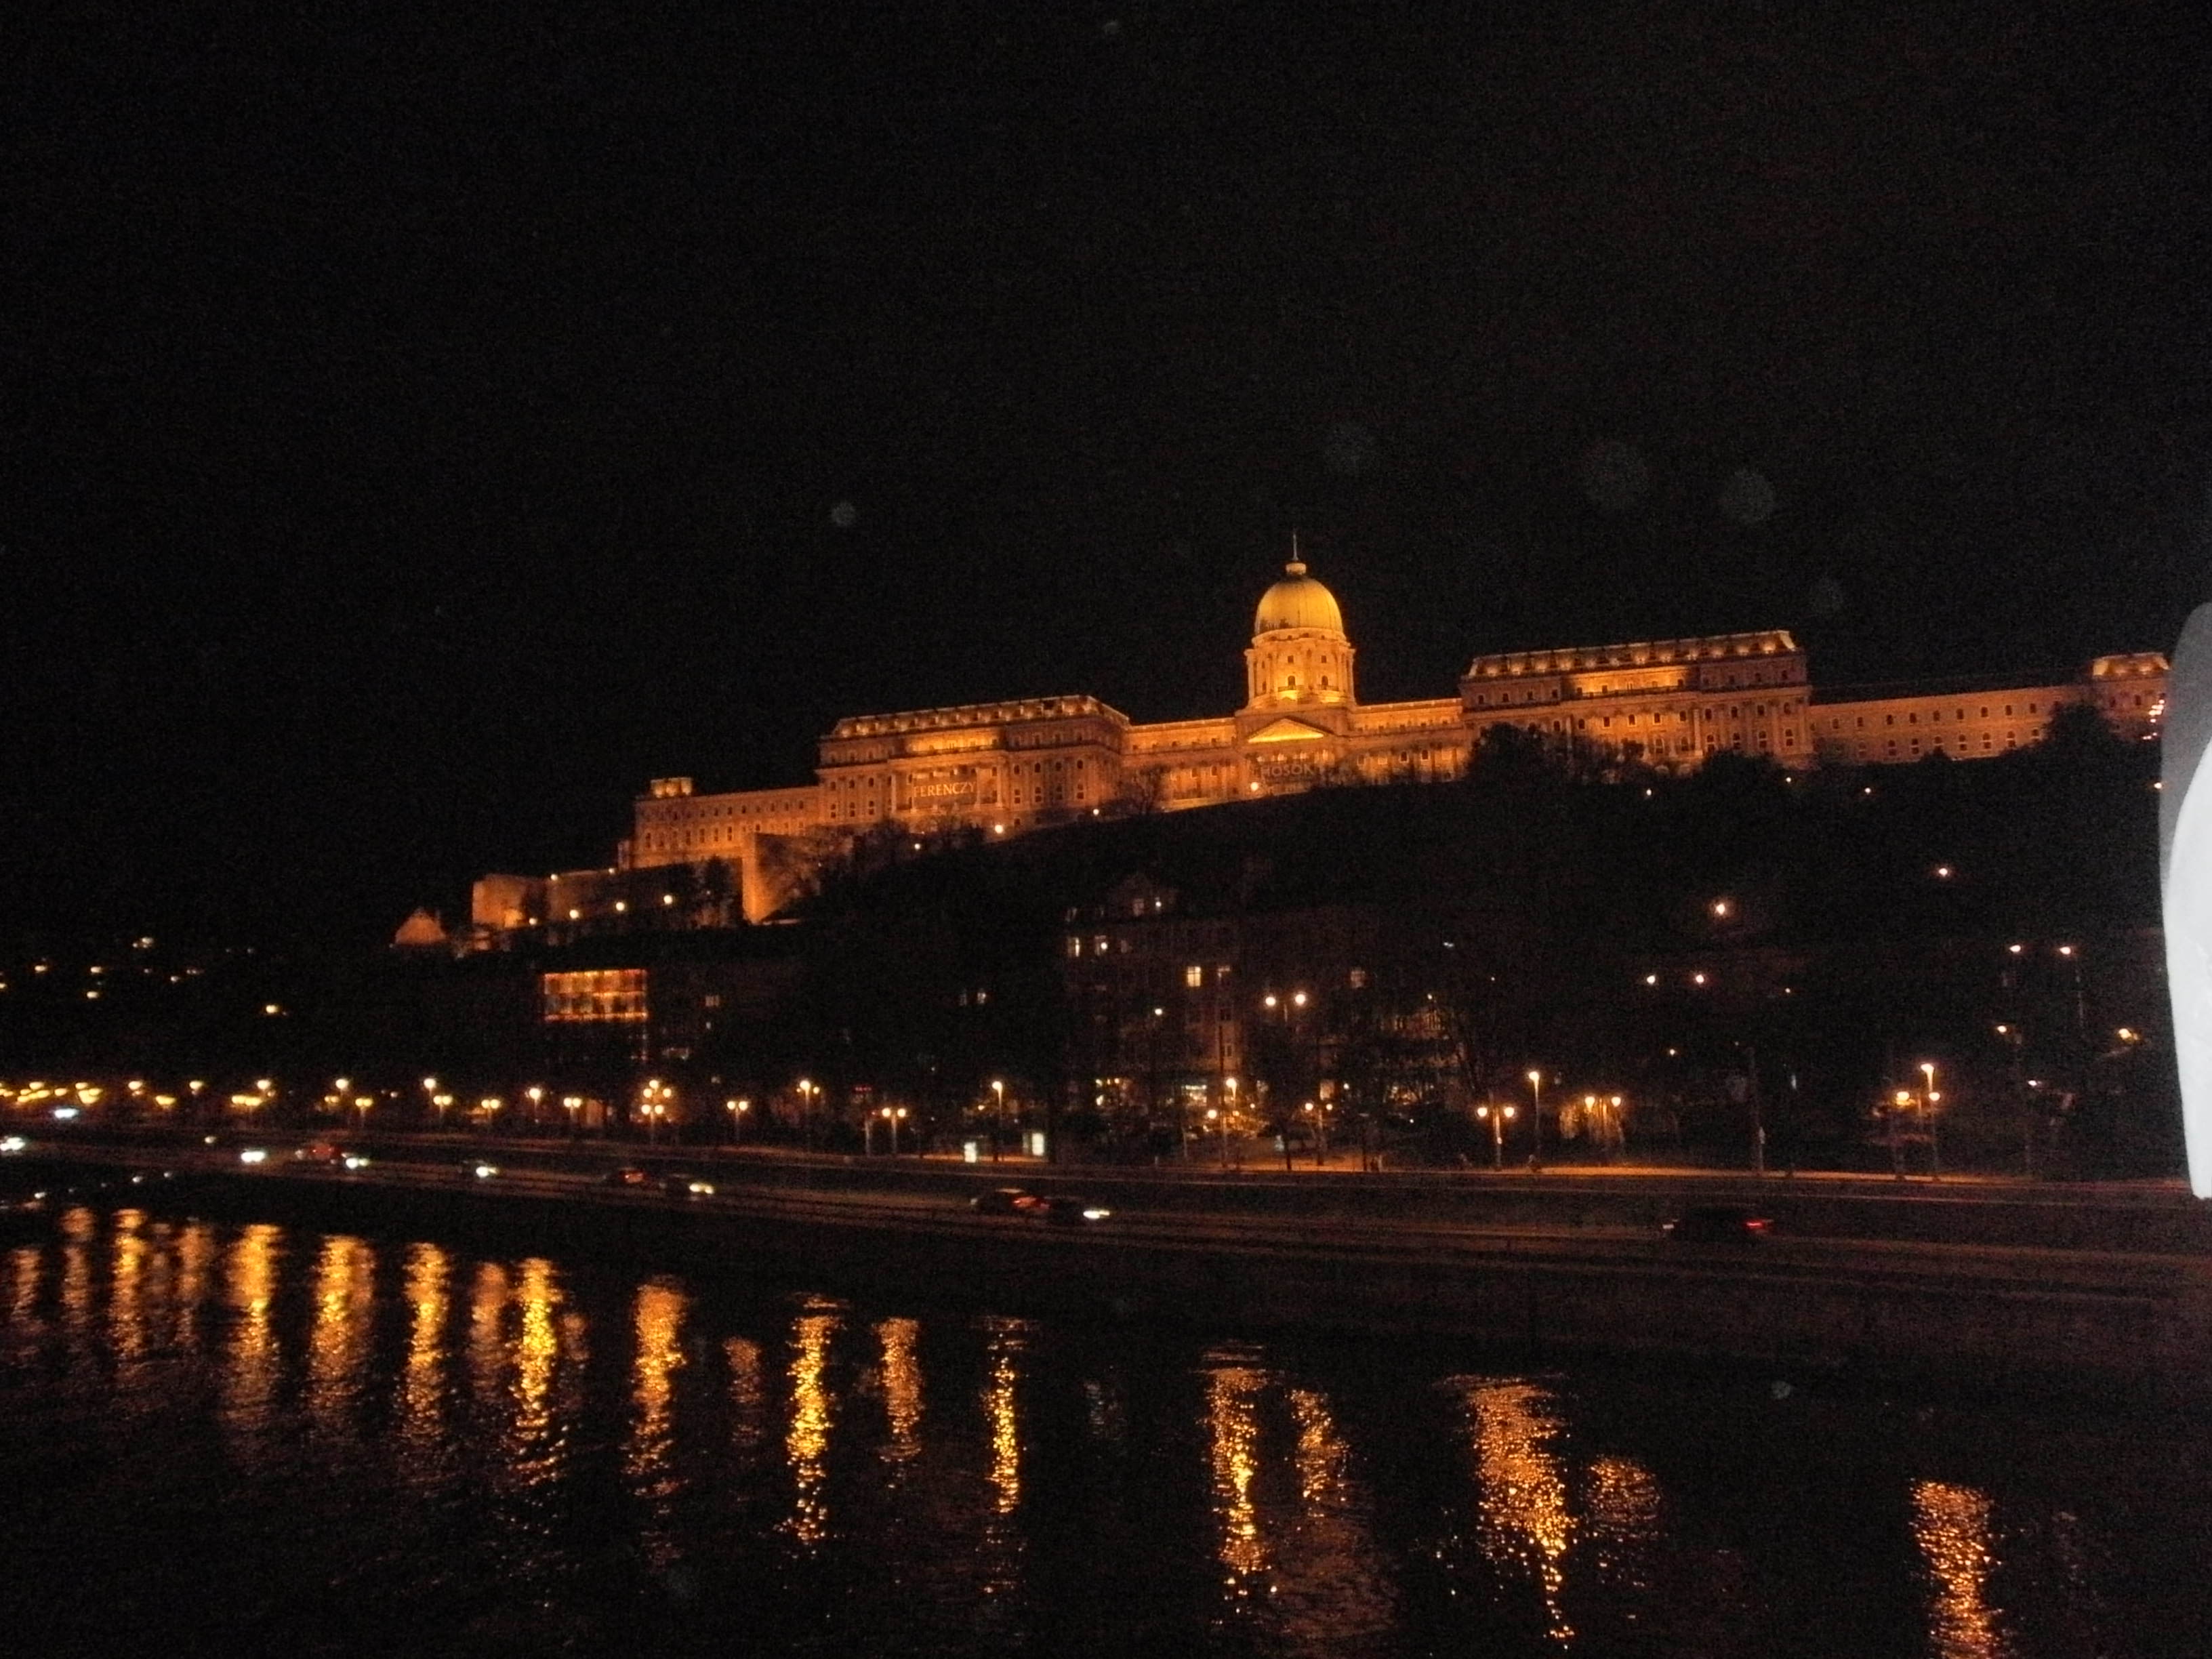 The view of castle at night - Budapest